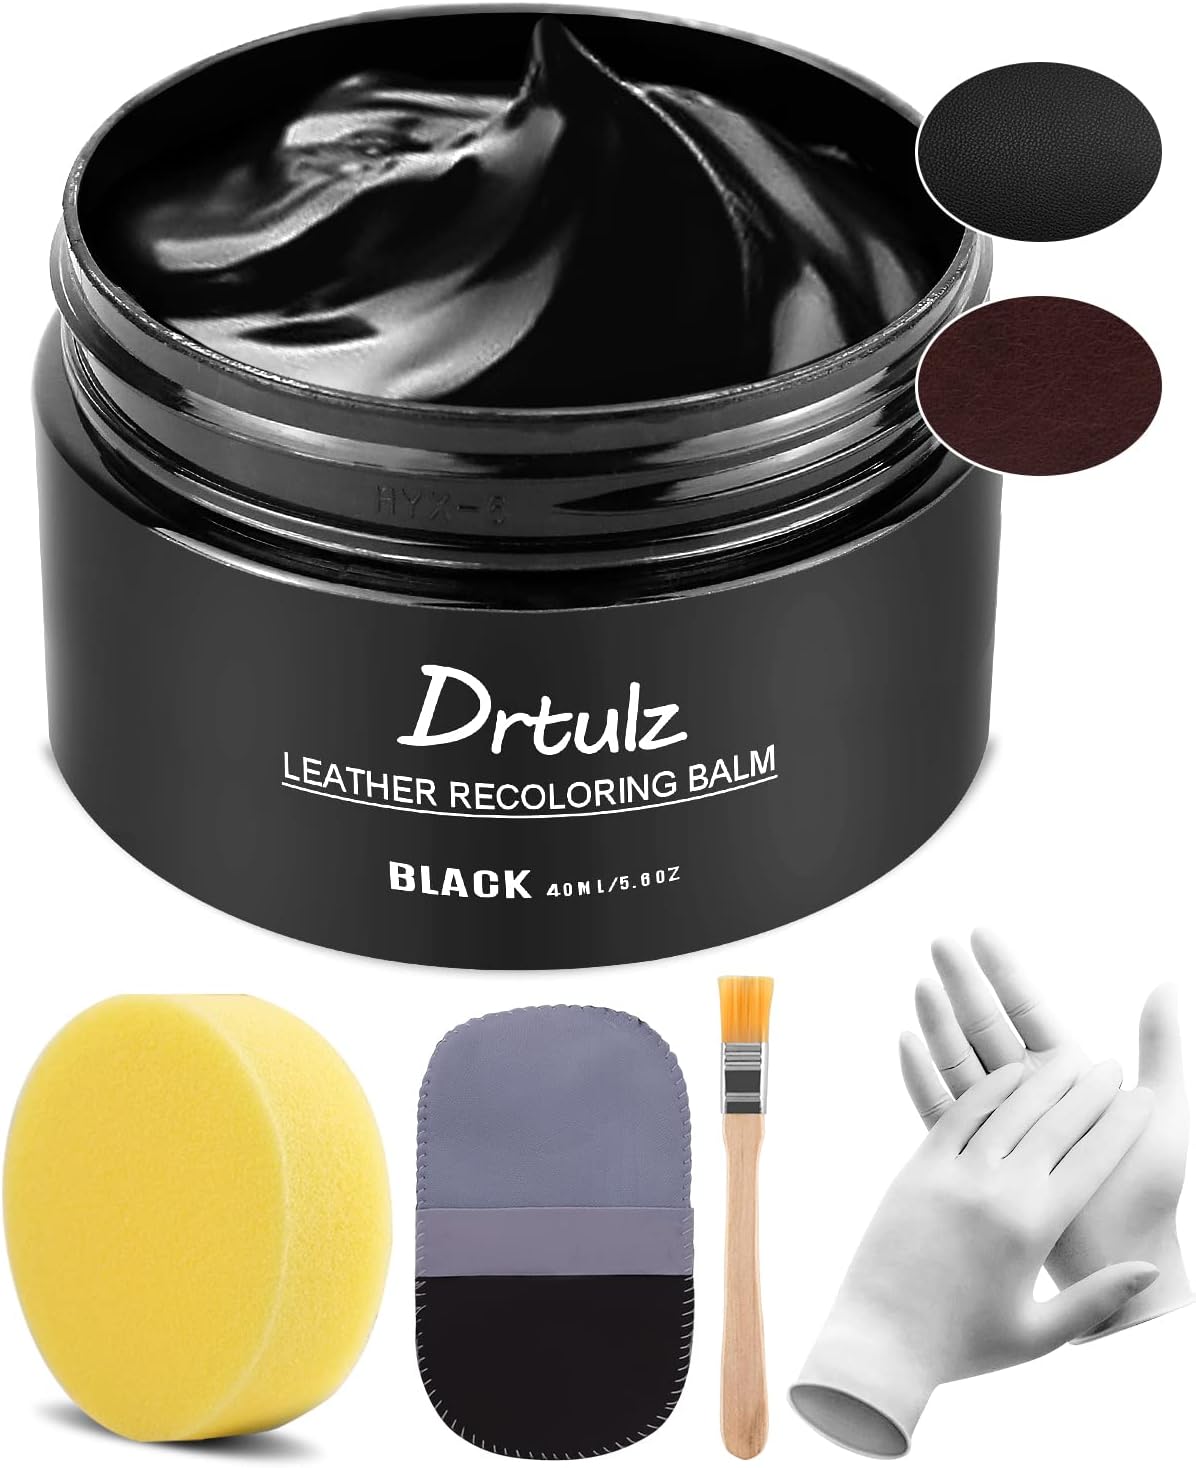 drtulz Black Leather Recoloring Balm, Leather Color [...]